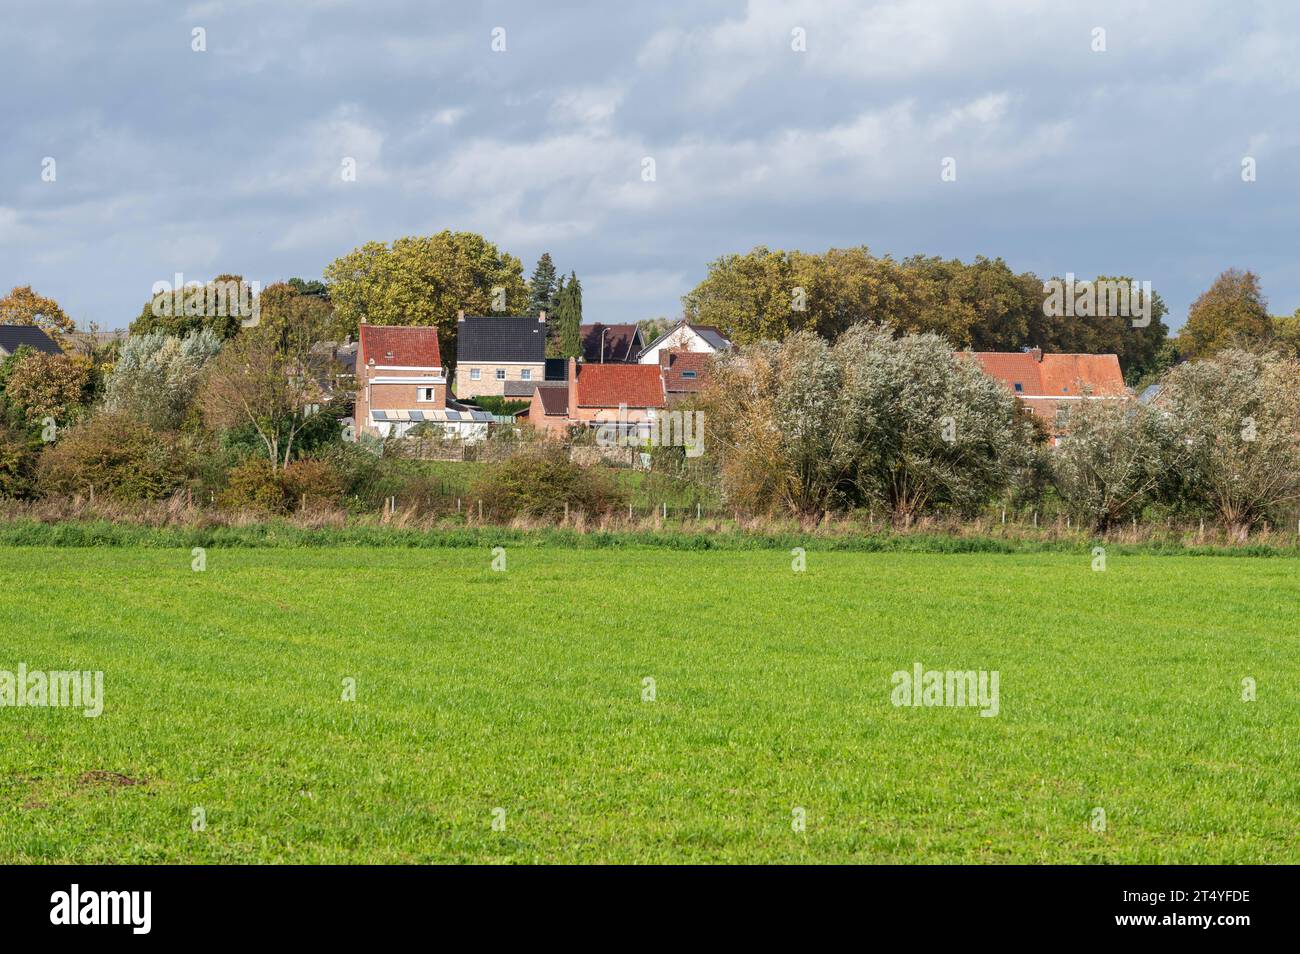 Green farmland and residential houses at the Flemish countryside around Gooik, Brabant, Belgium Credit: Imago/Alamy Live News Stock Photo